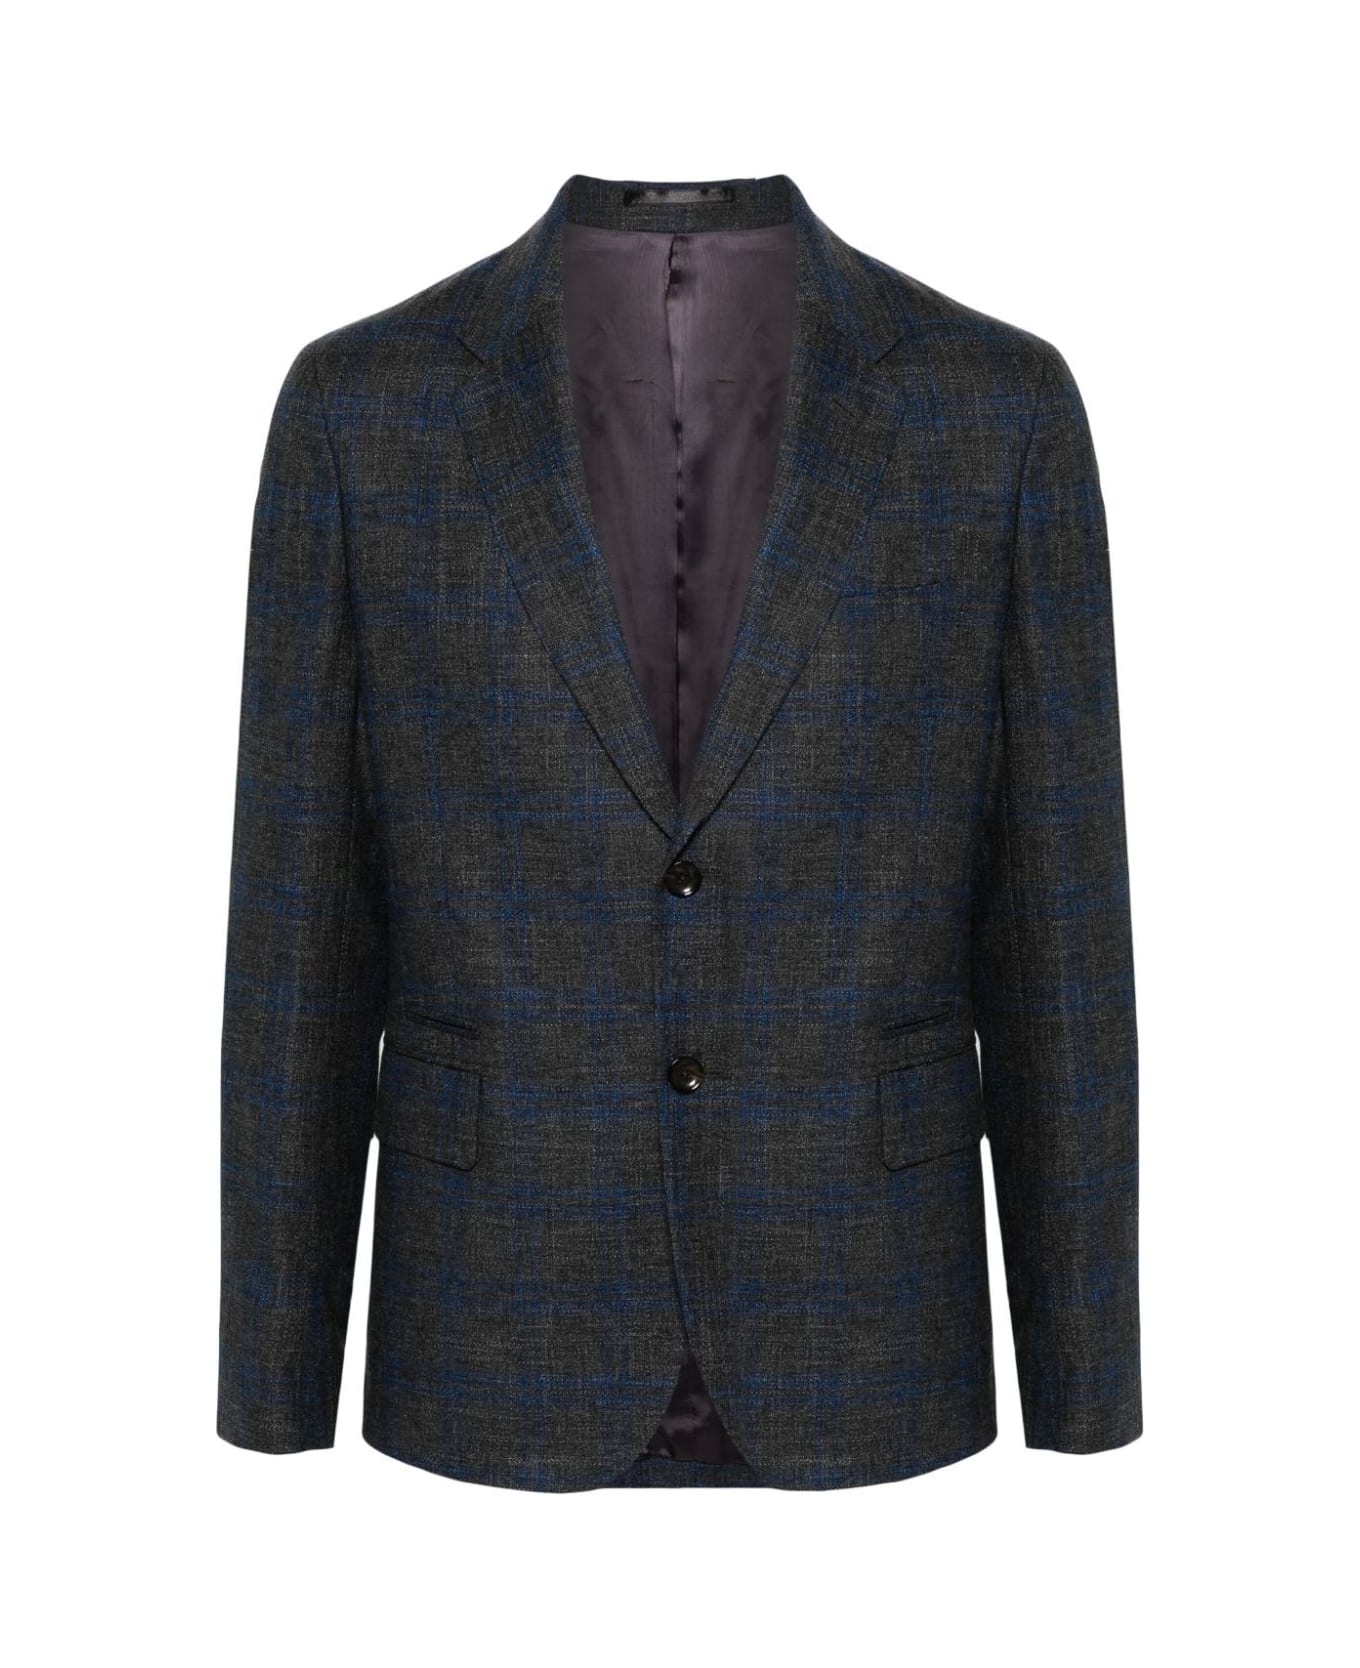 Paul Smith Mens Two Buttons Jacket - Anthracite